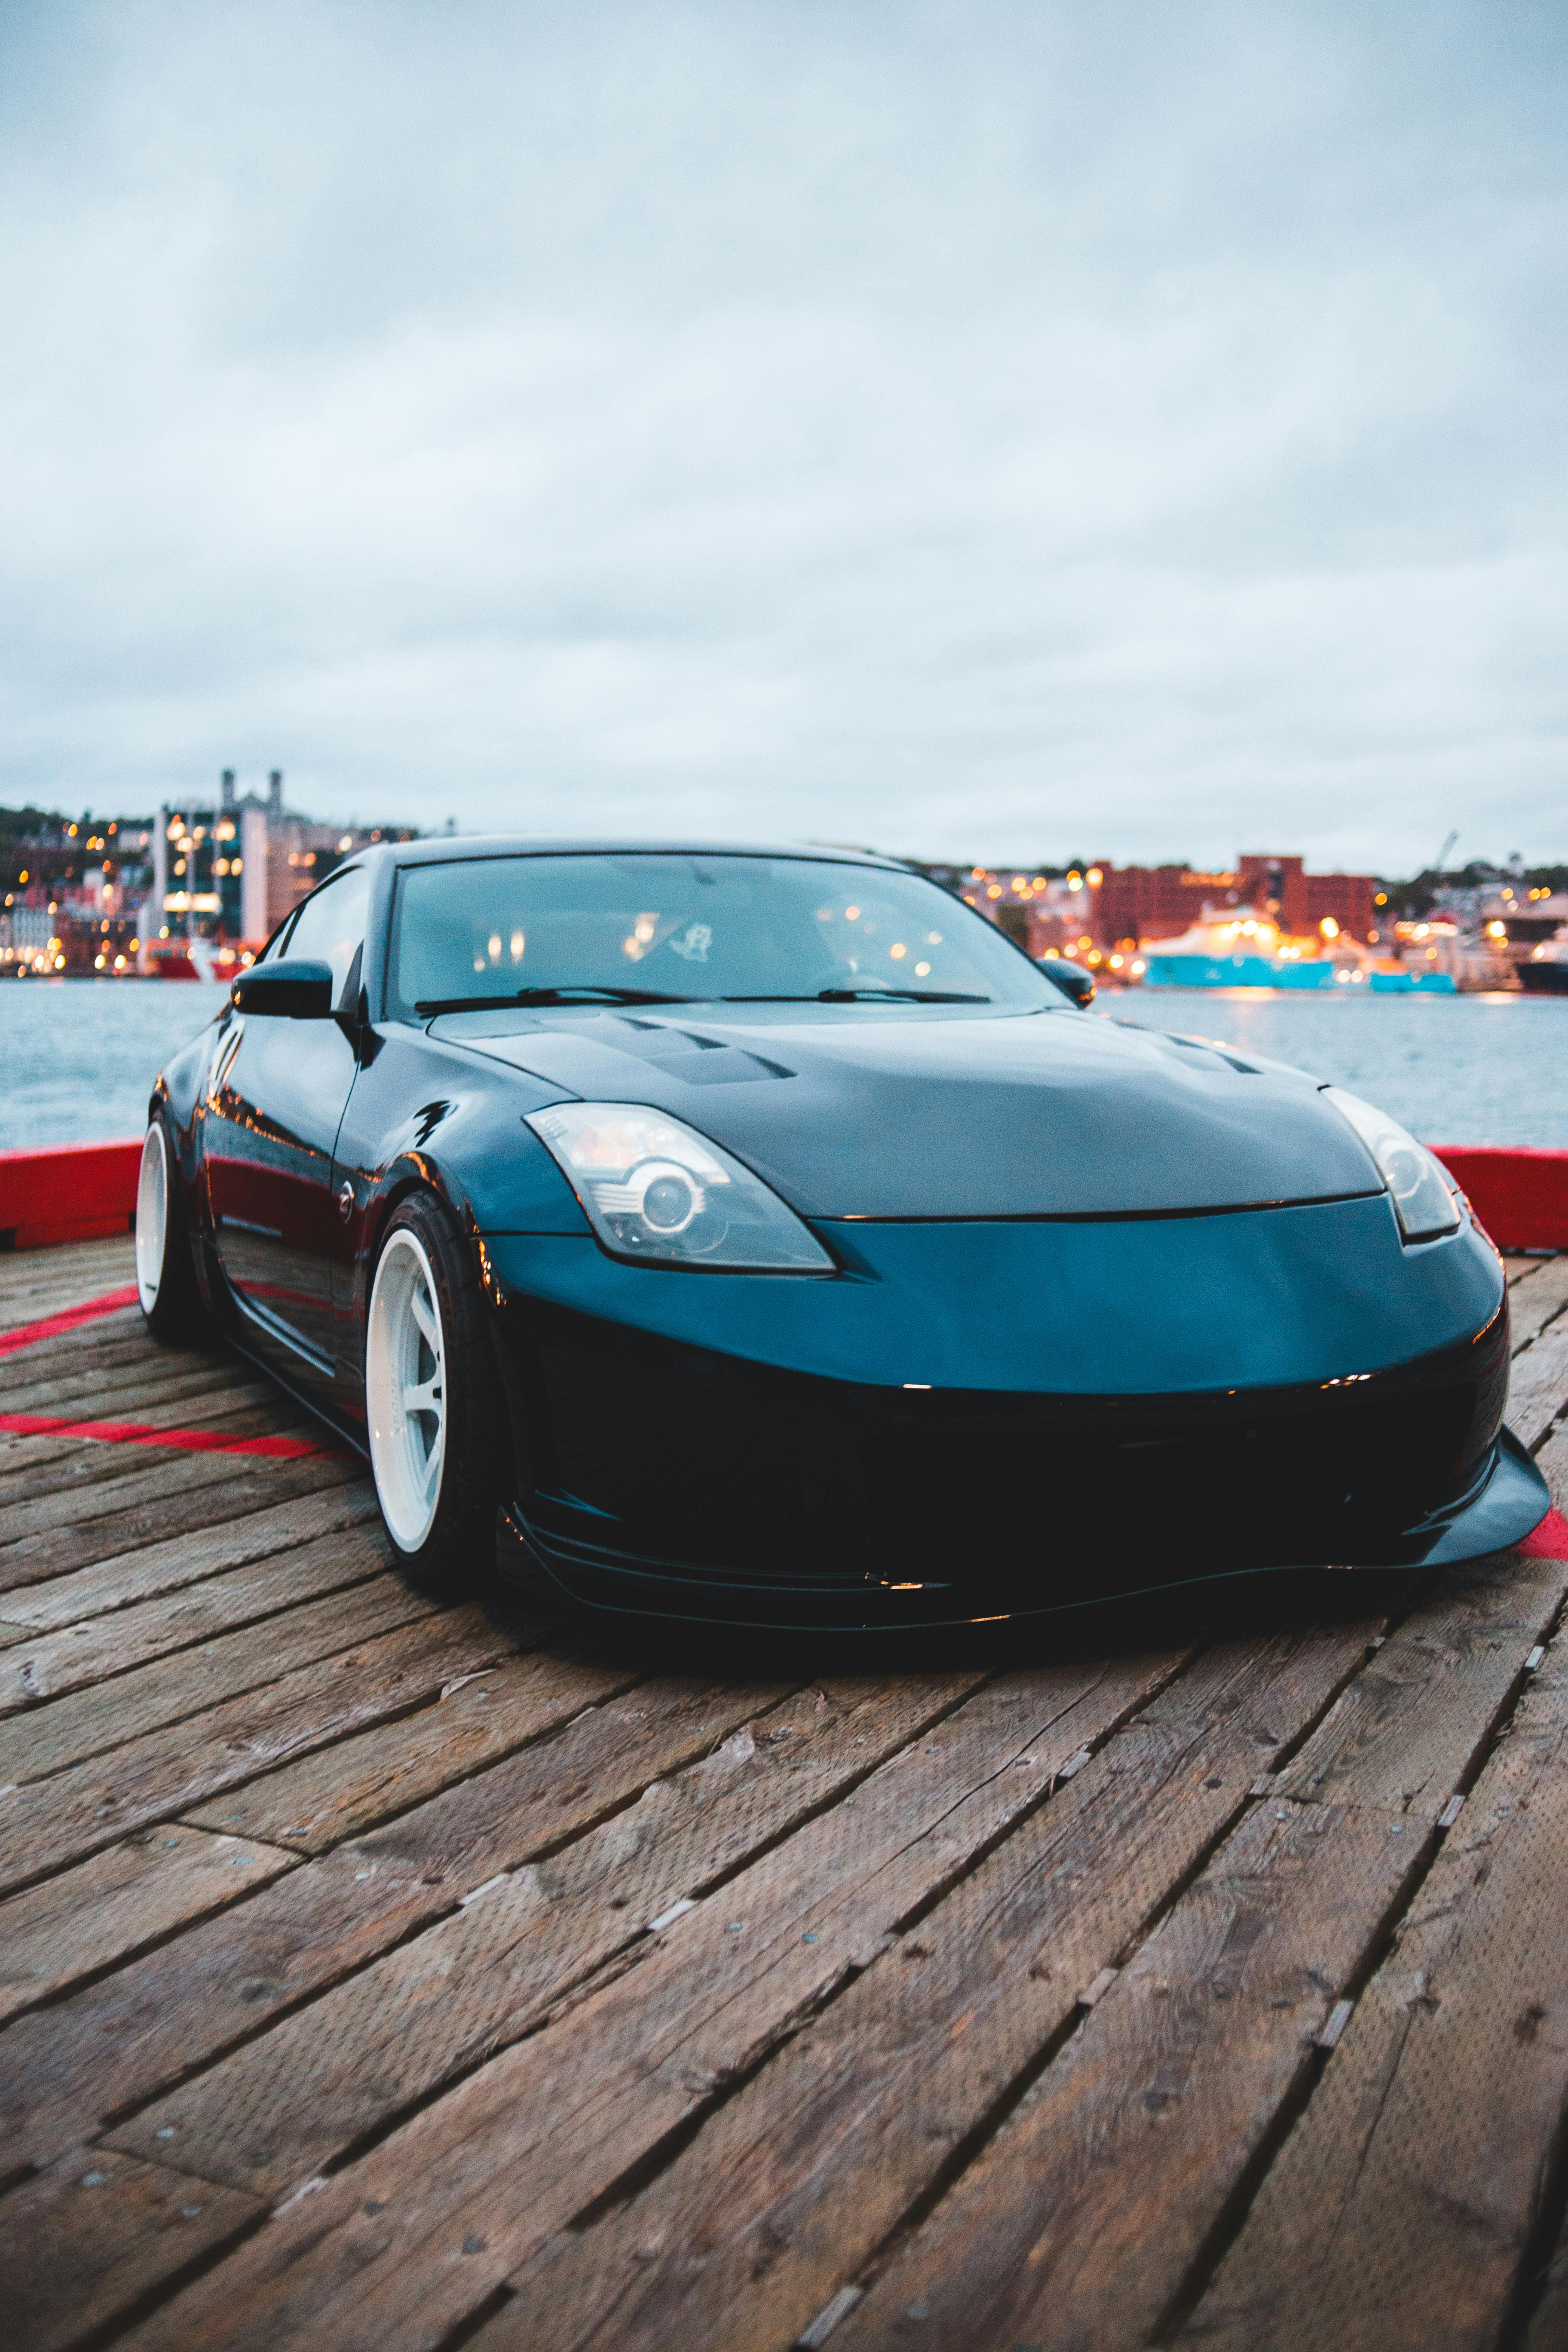 A Nissan 350z at a Dock  Free Stock Photo